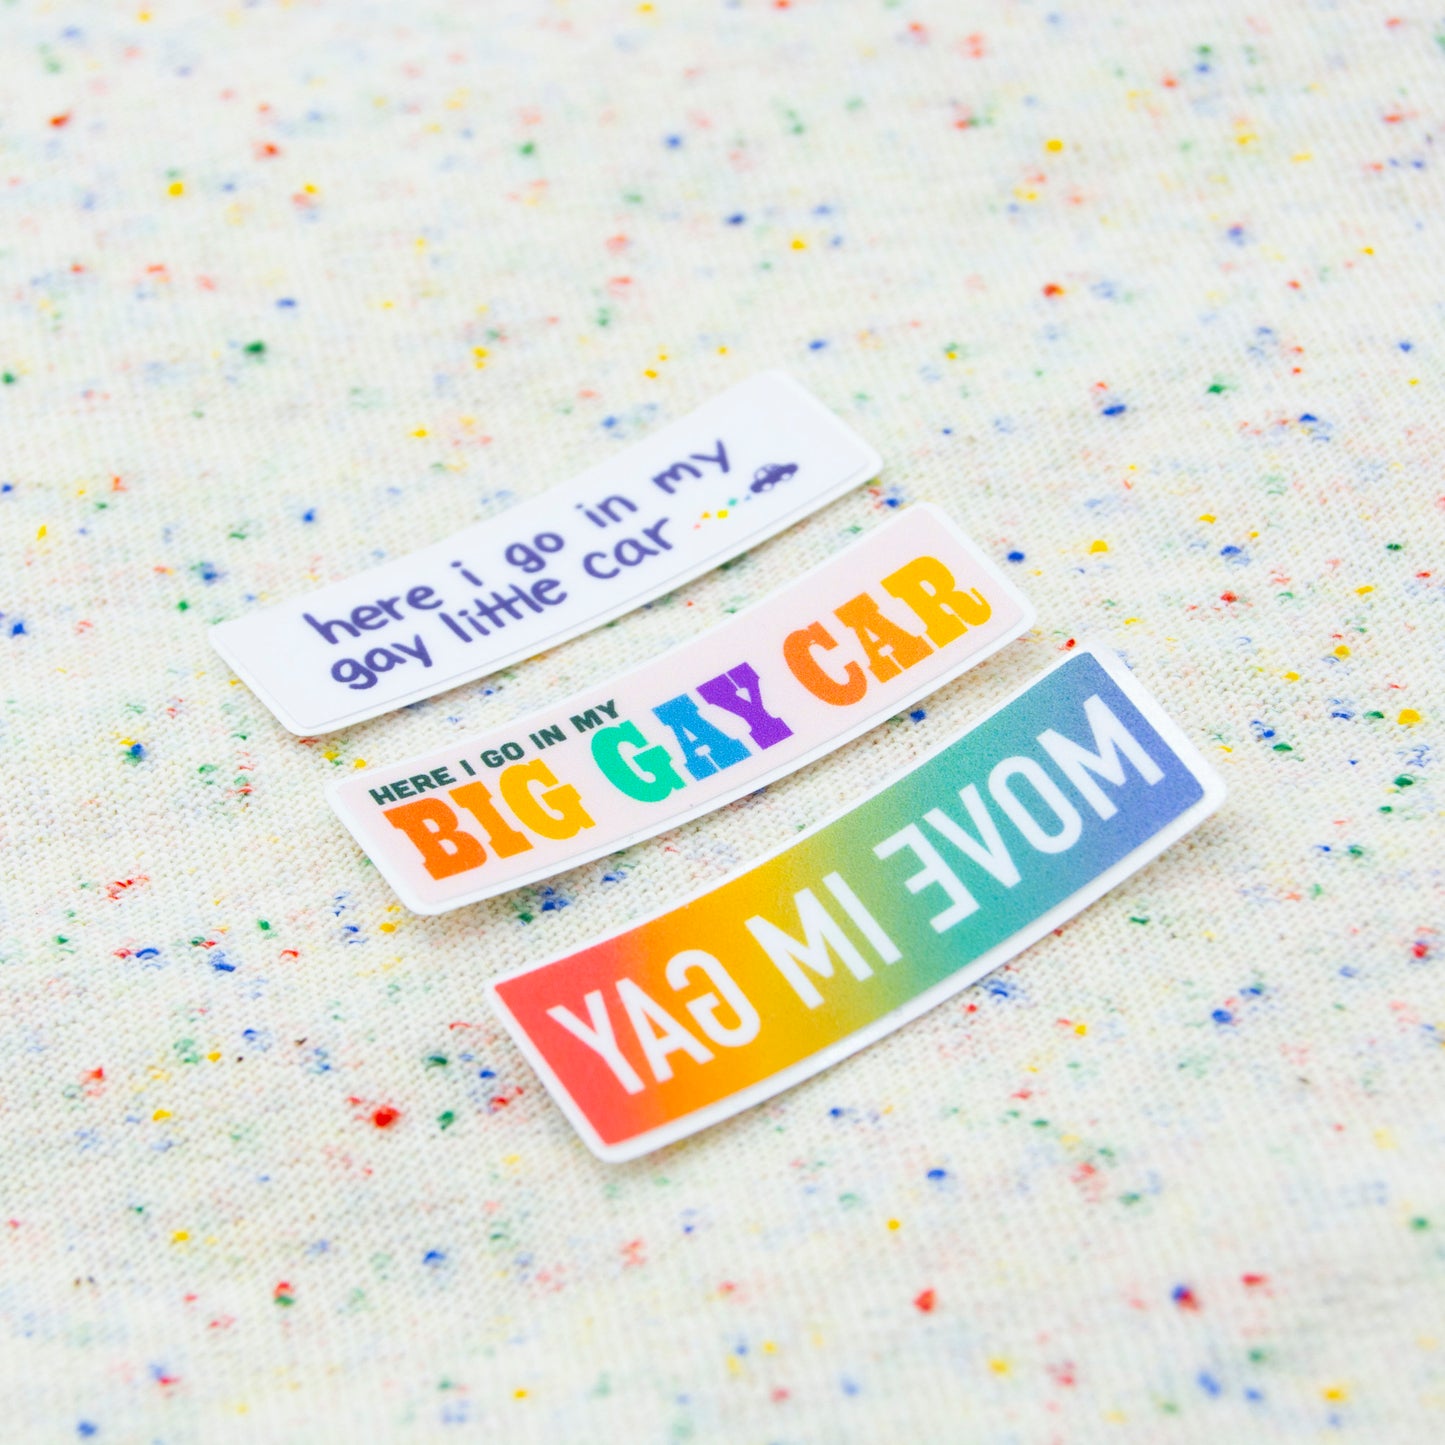 All three mini stickers at an angle together on a funfetti fabric background.